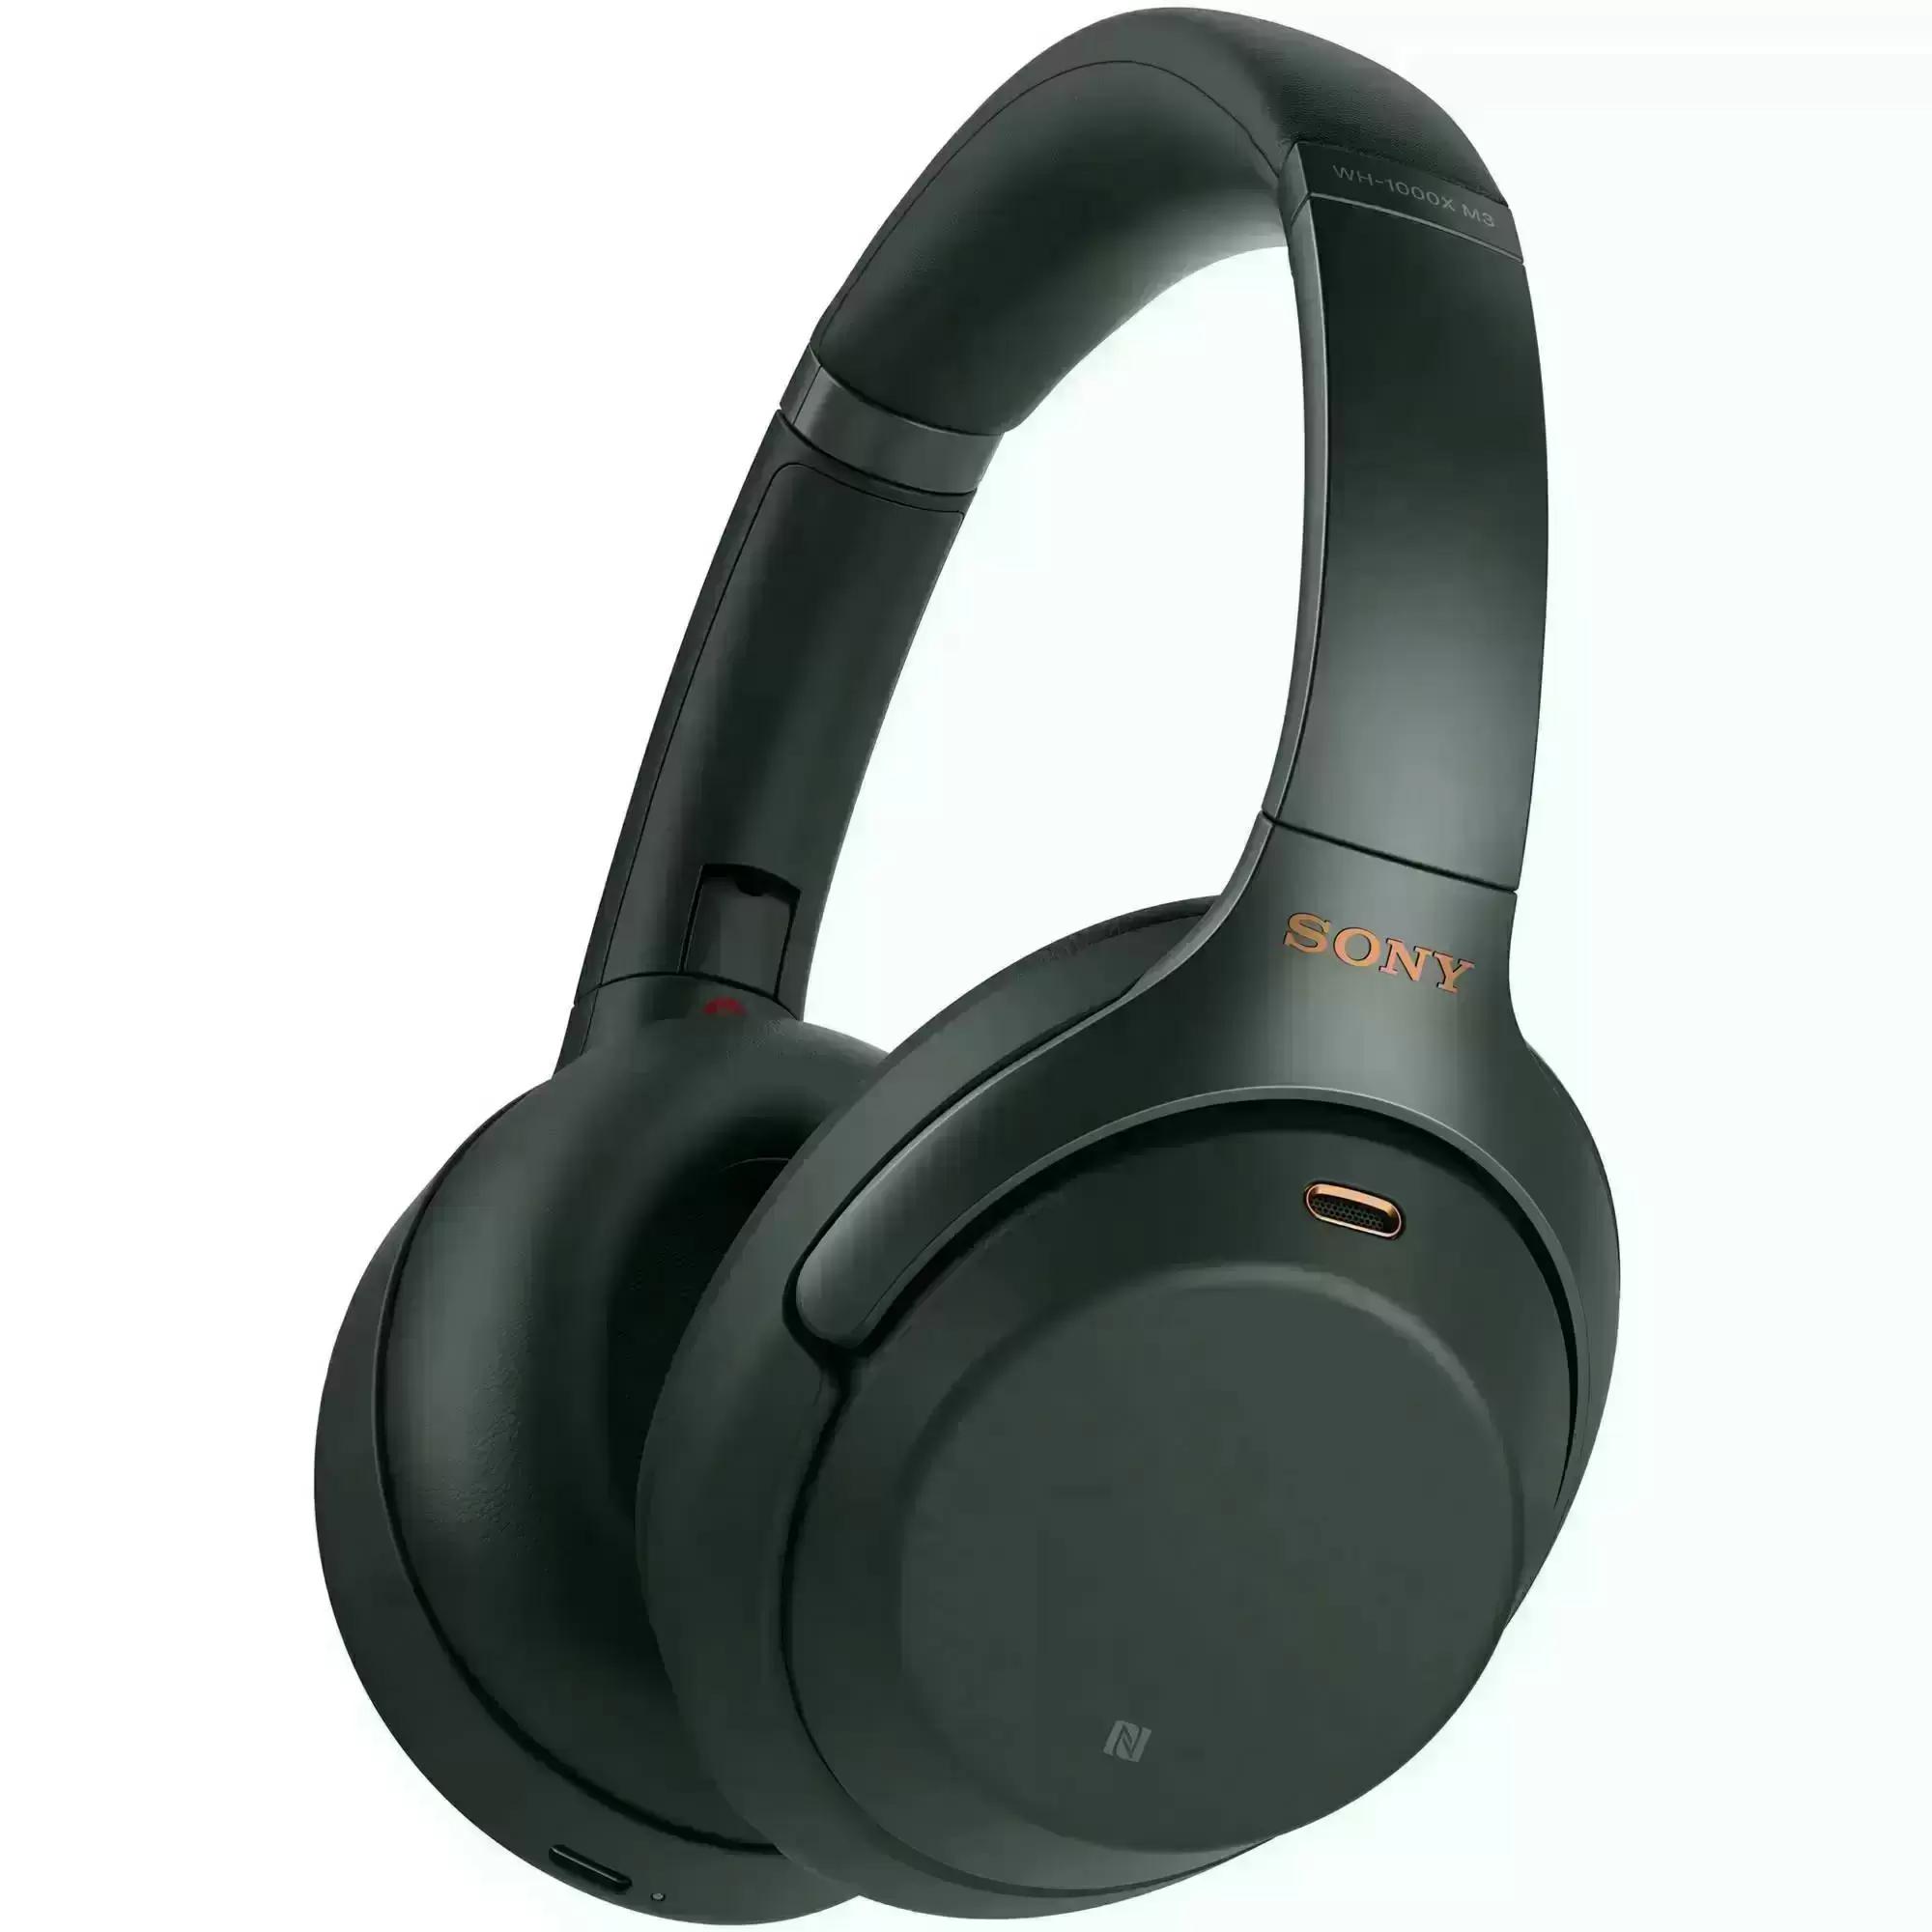 Sony WH-1000XM3 Noise Cancelling Wireless Headphones for $169.99 Shipped